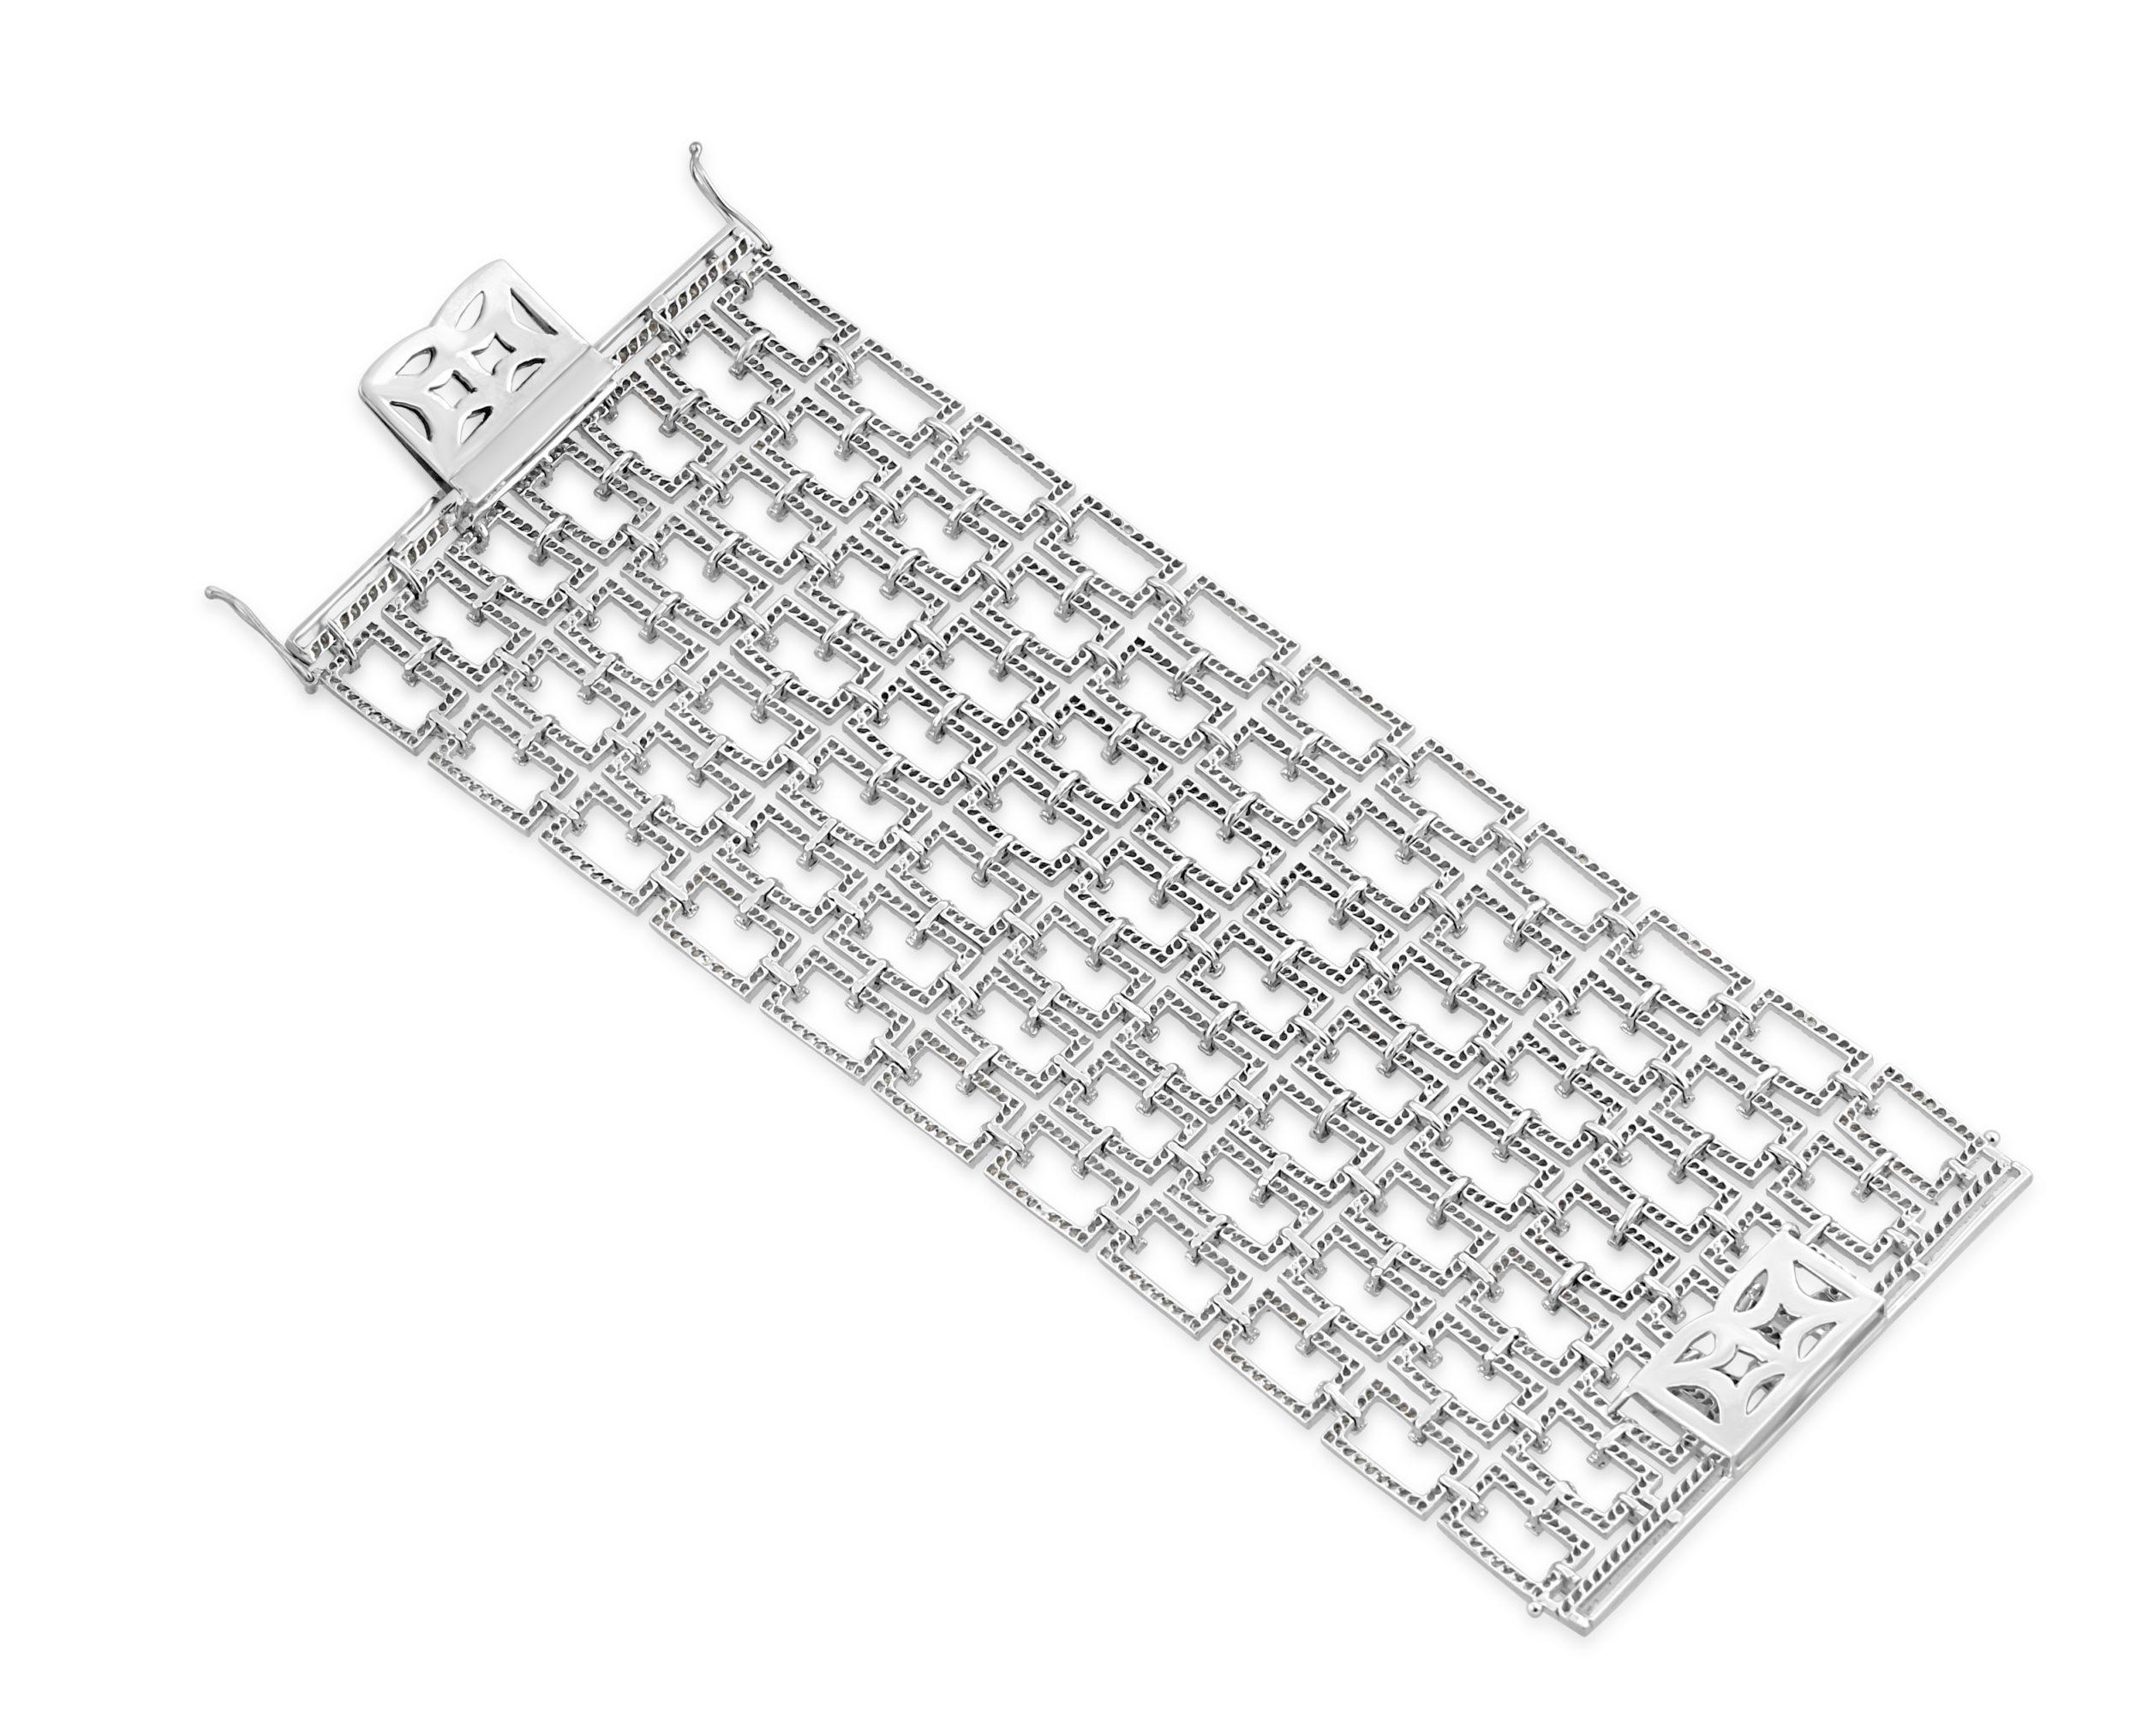 An 18k white gold and diamond bracelet in a rectangular panel openwork lattice design. A statement contemporary piece, this is an elegant and glamorous bracelet perfect for evening wear. Set with approximately 20-22 carats of diamonds in total, of